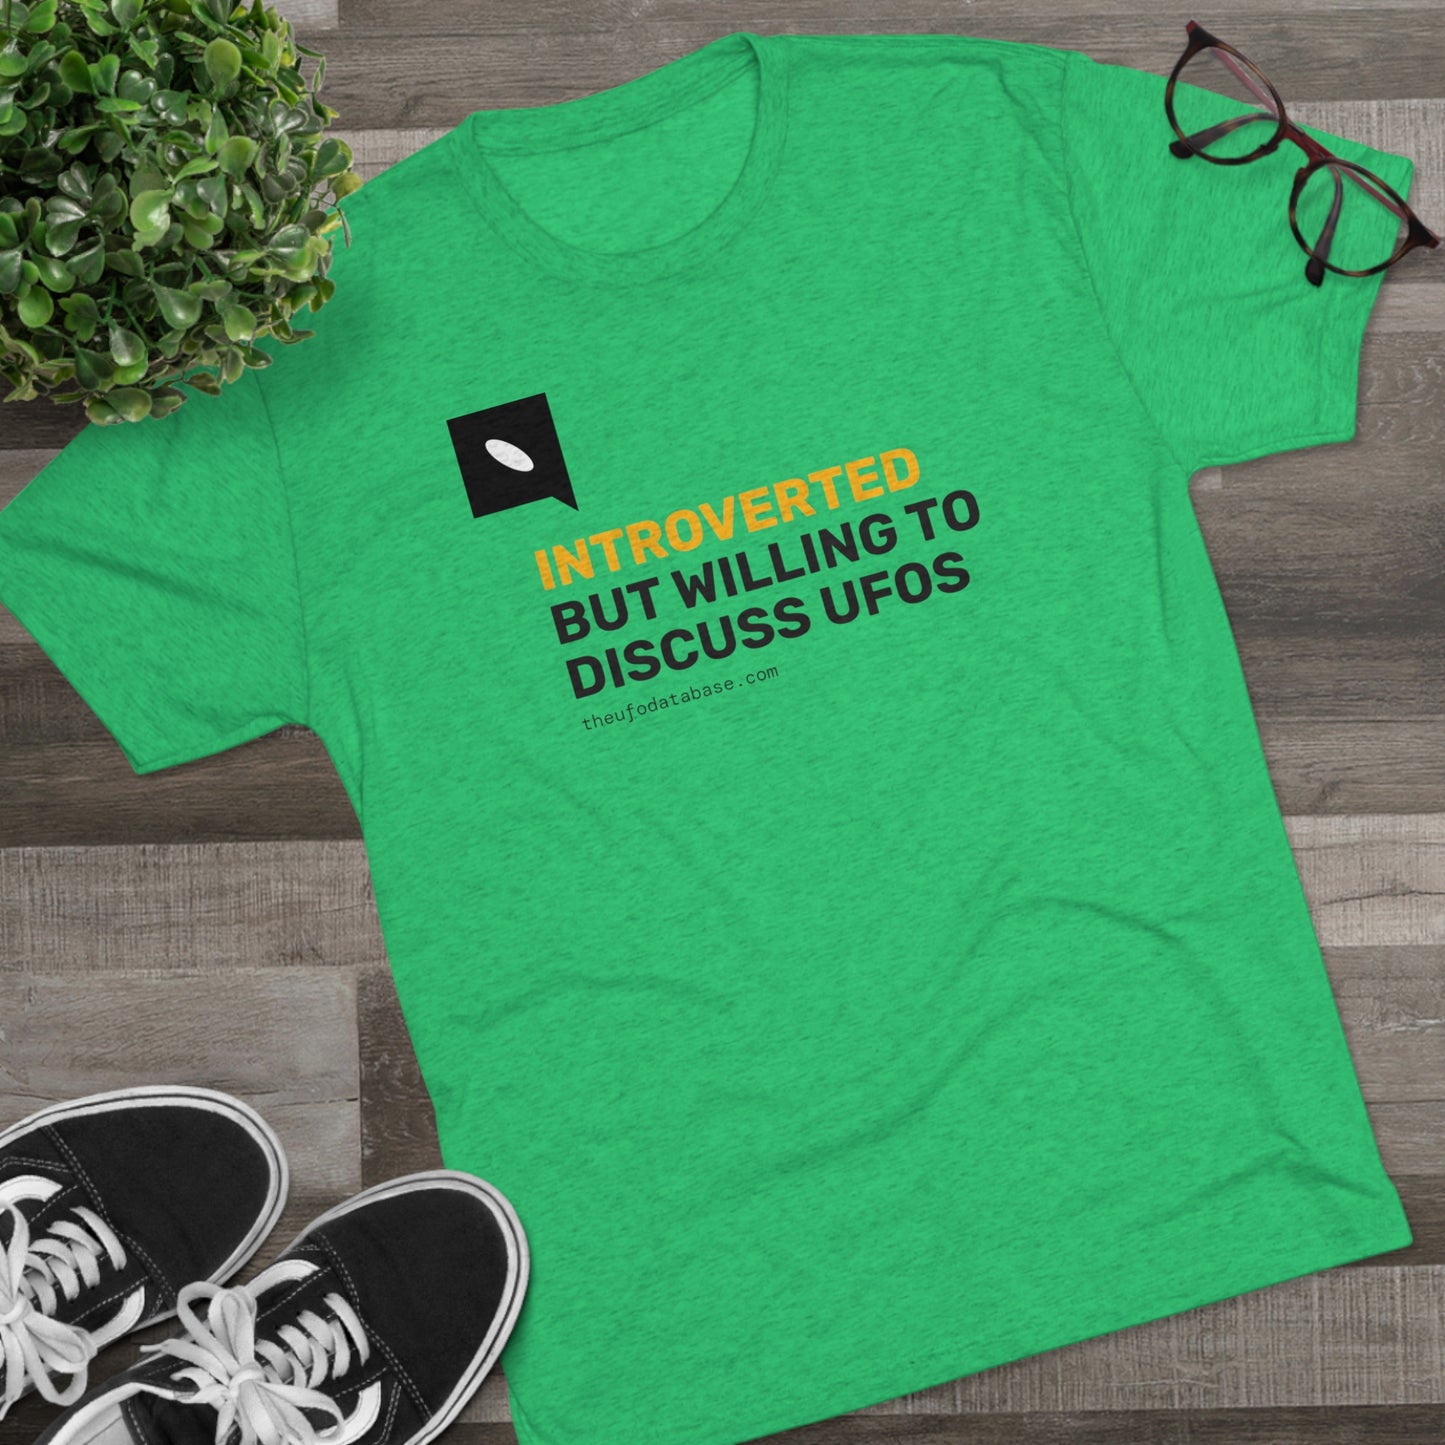 Introverted But Willing to Discuss UFOs T-Shirt